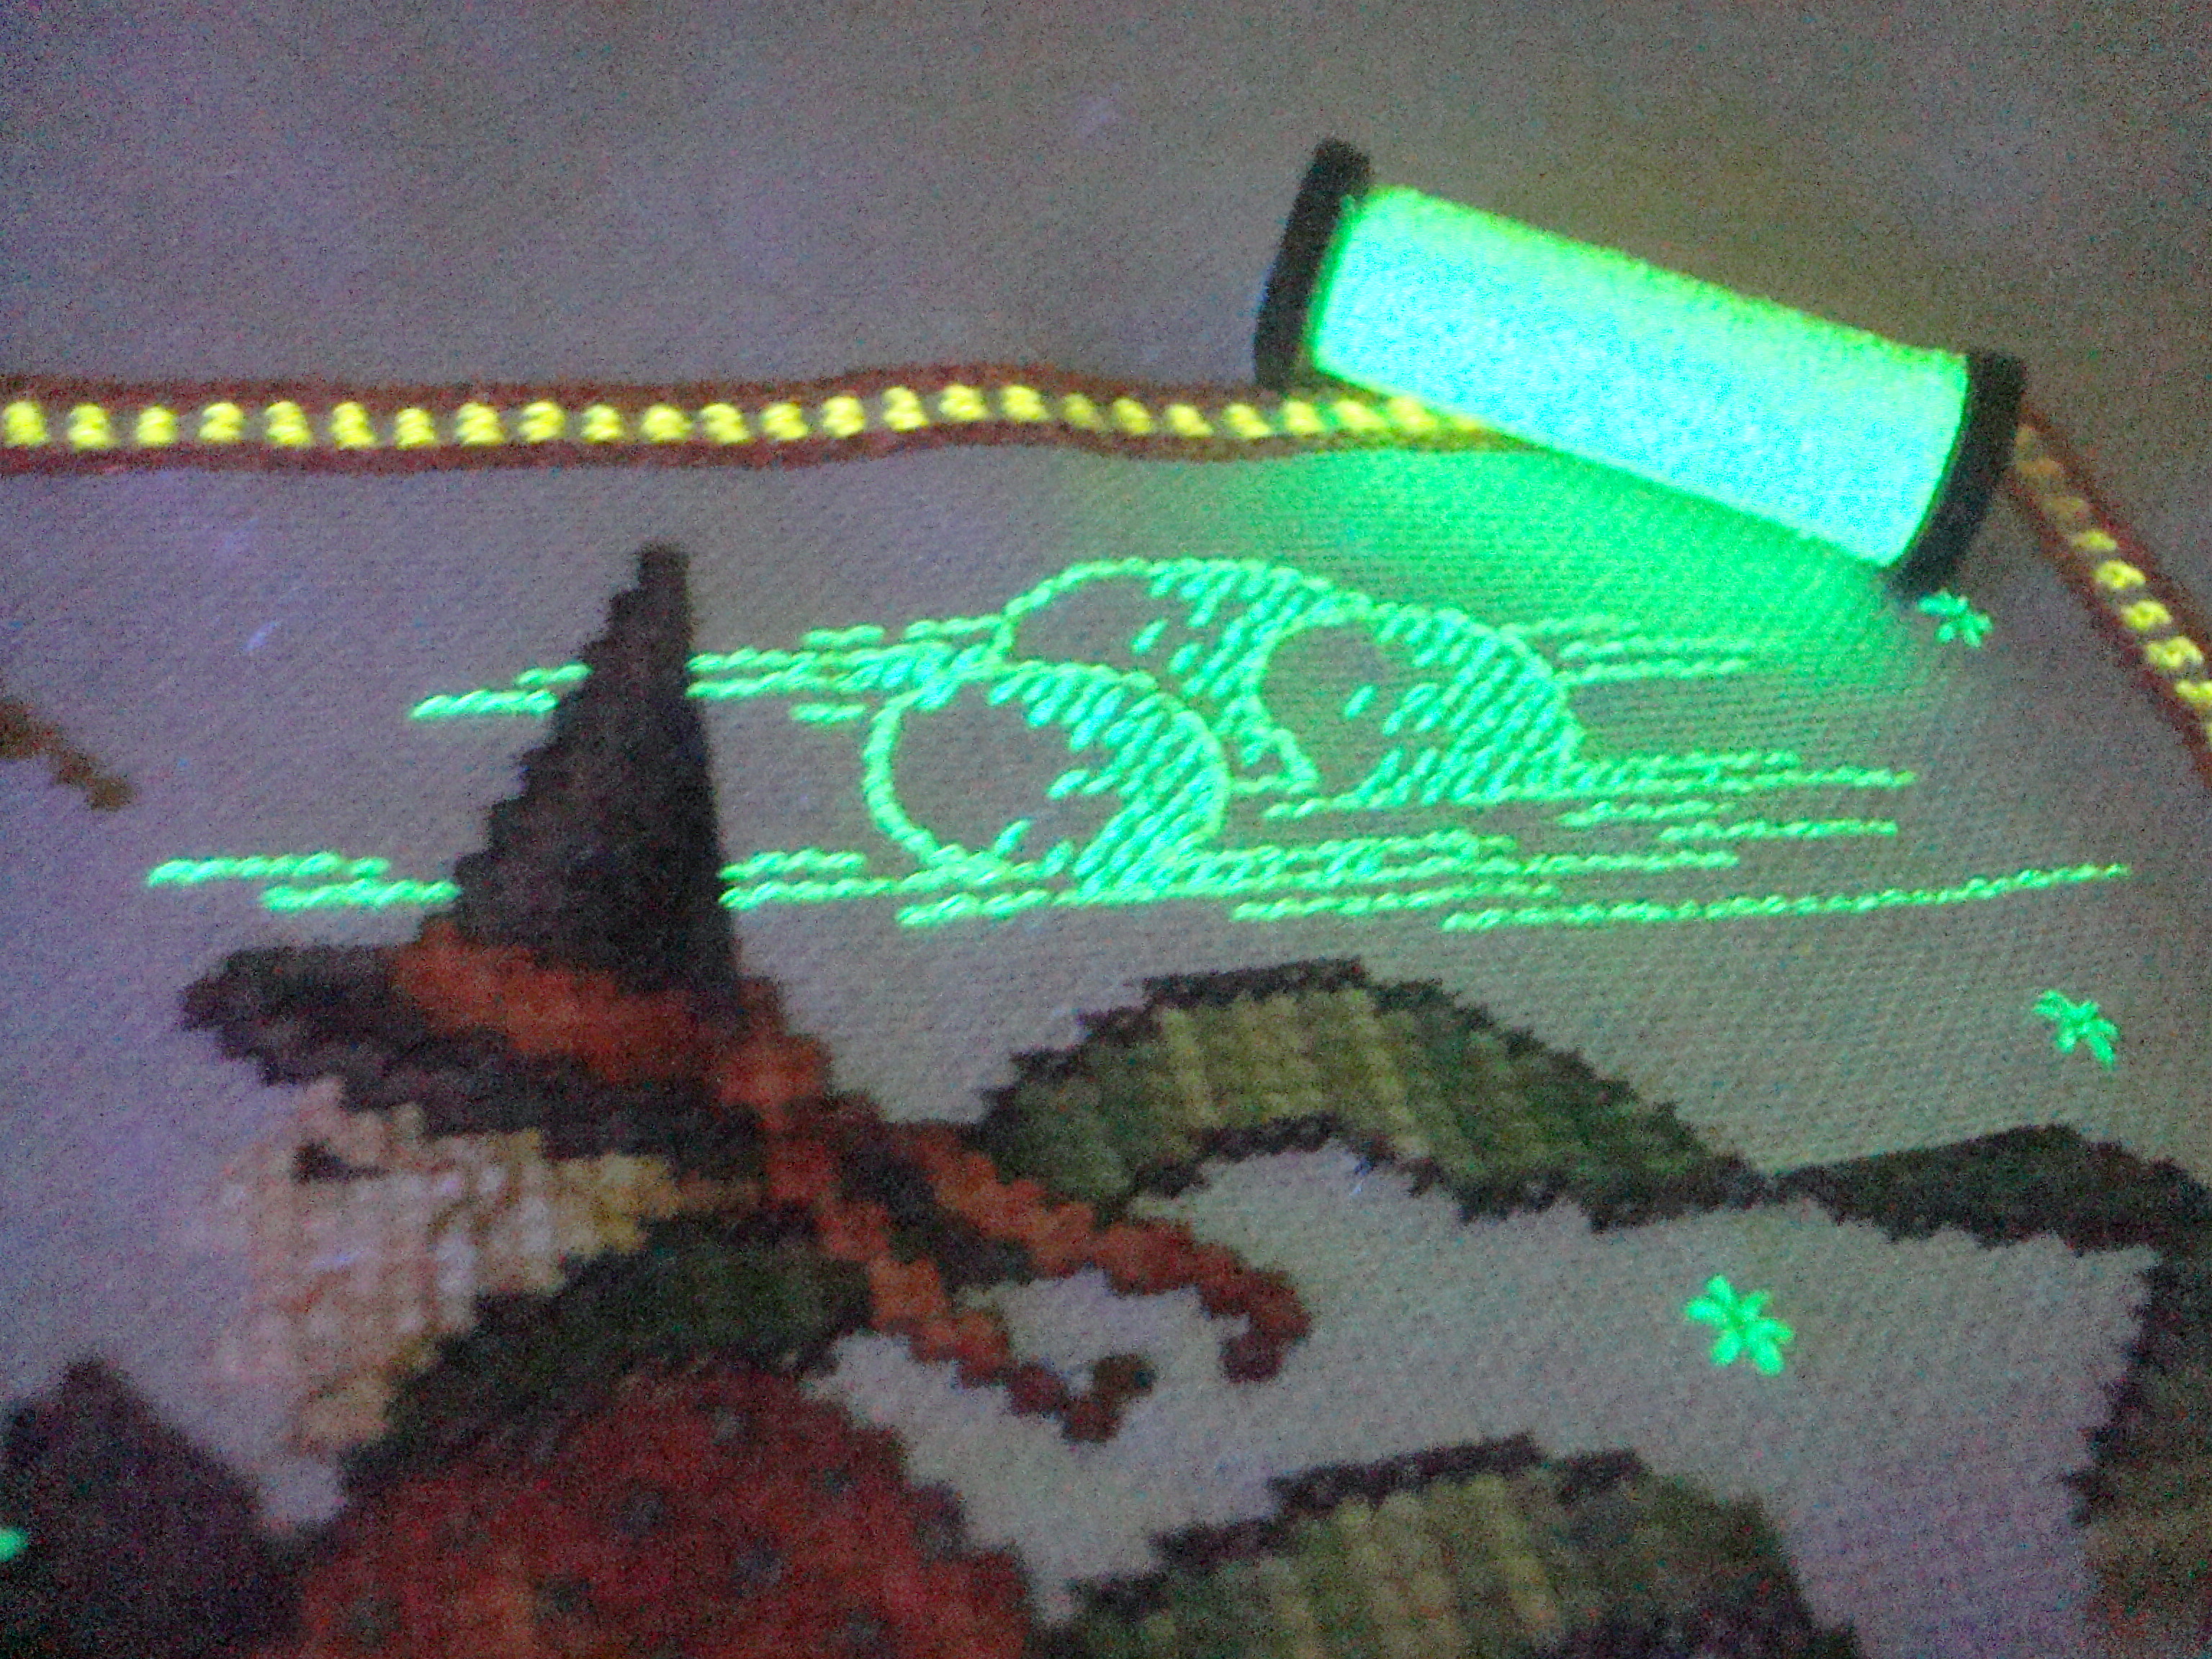 Glow in the dark thread is epic! I created the piece to hopefully